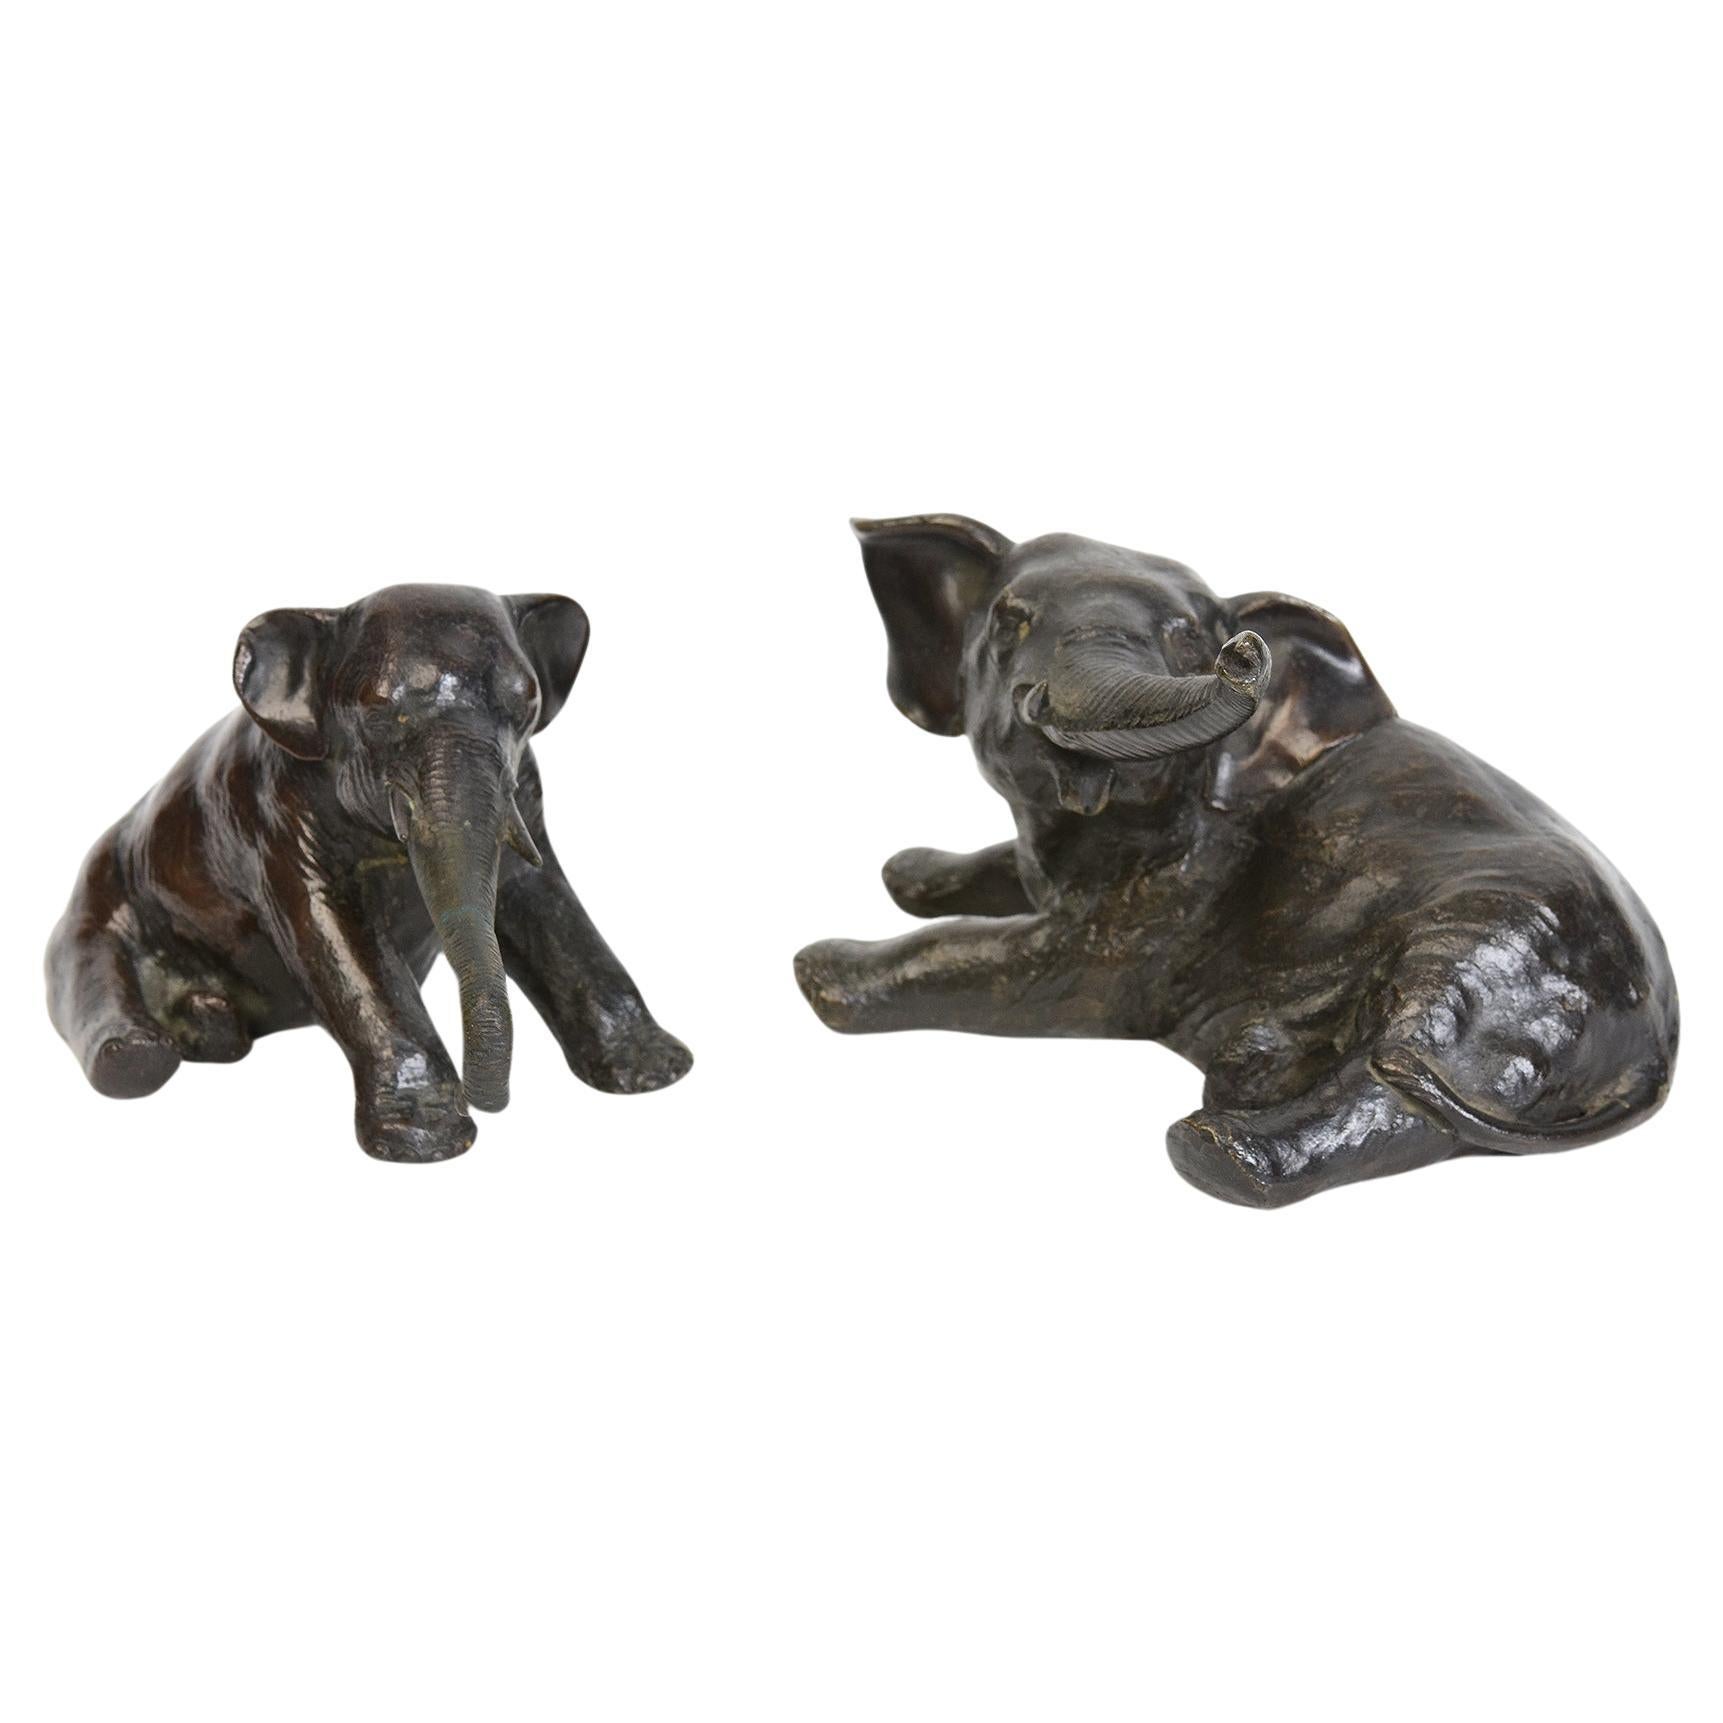 19th Century, A Pair of Antique Japanese Bronze Animal Elephants For Sale